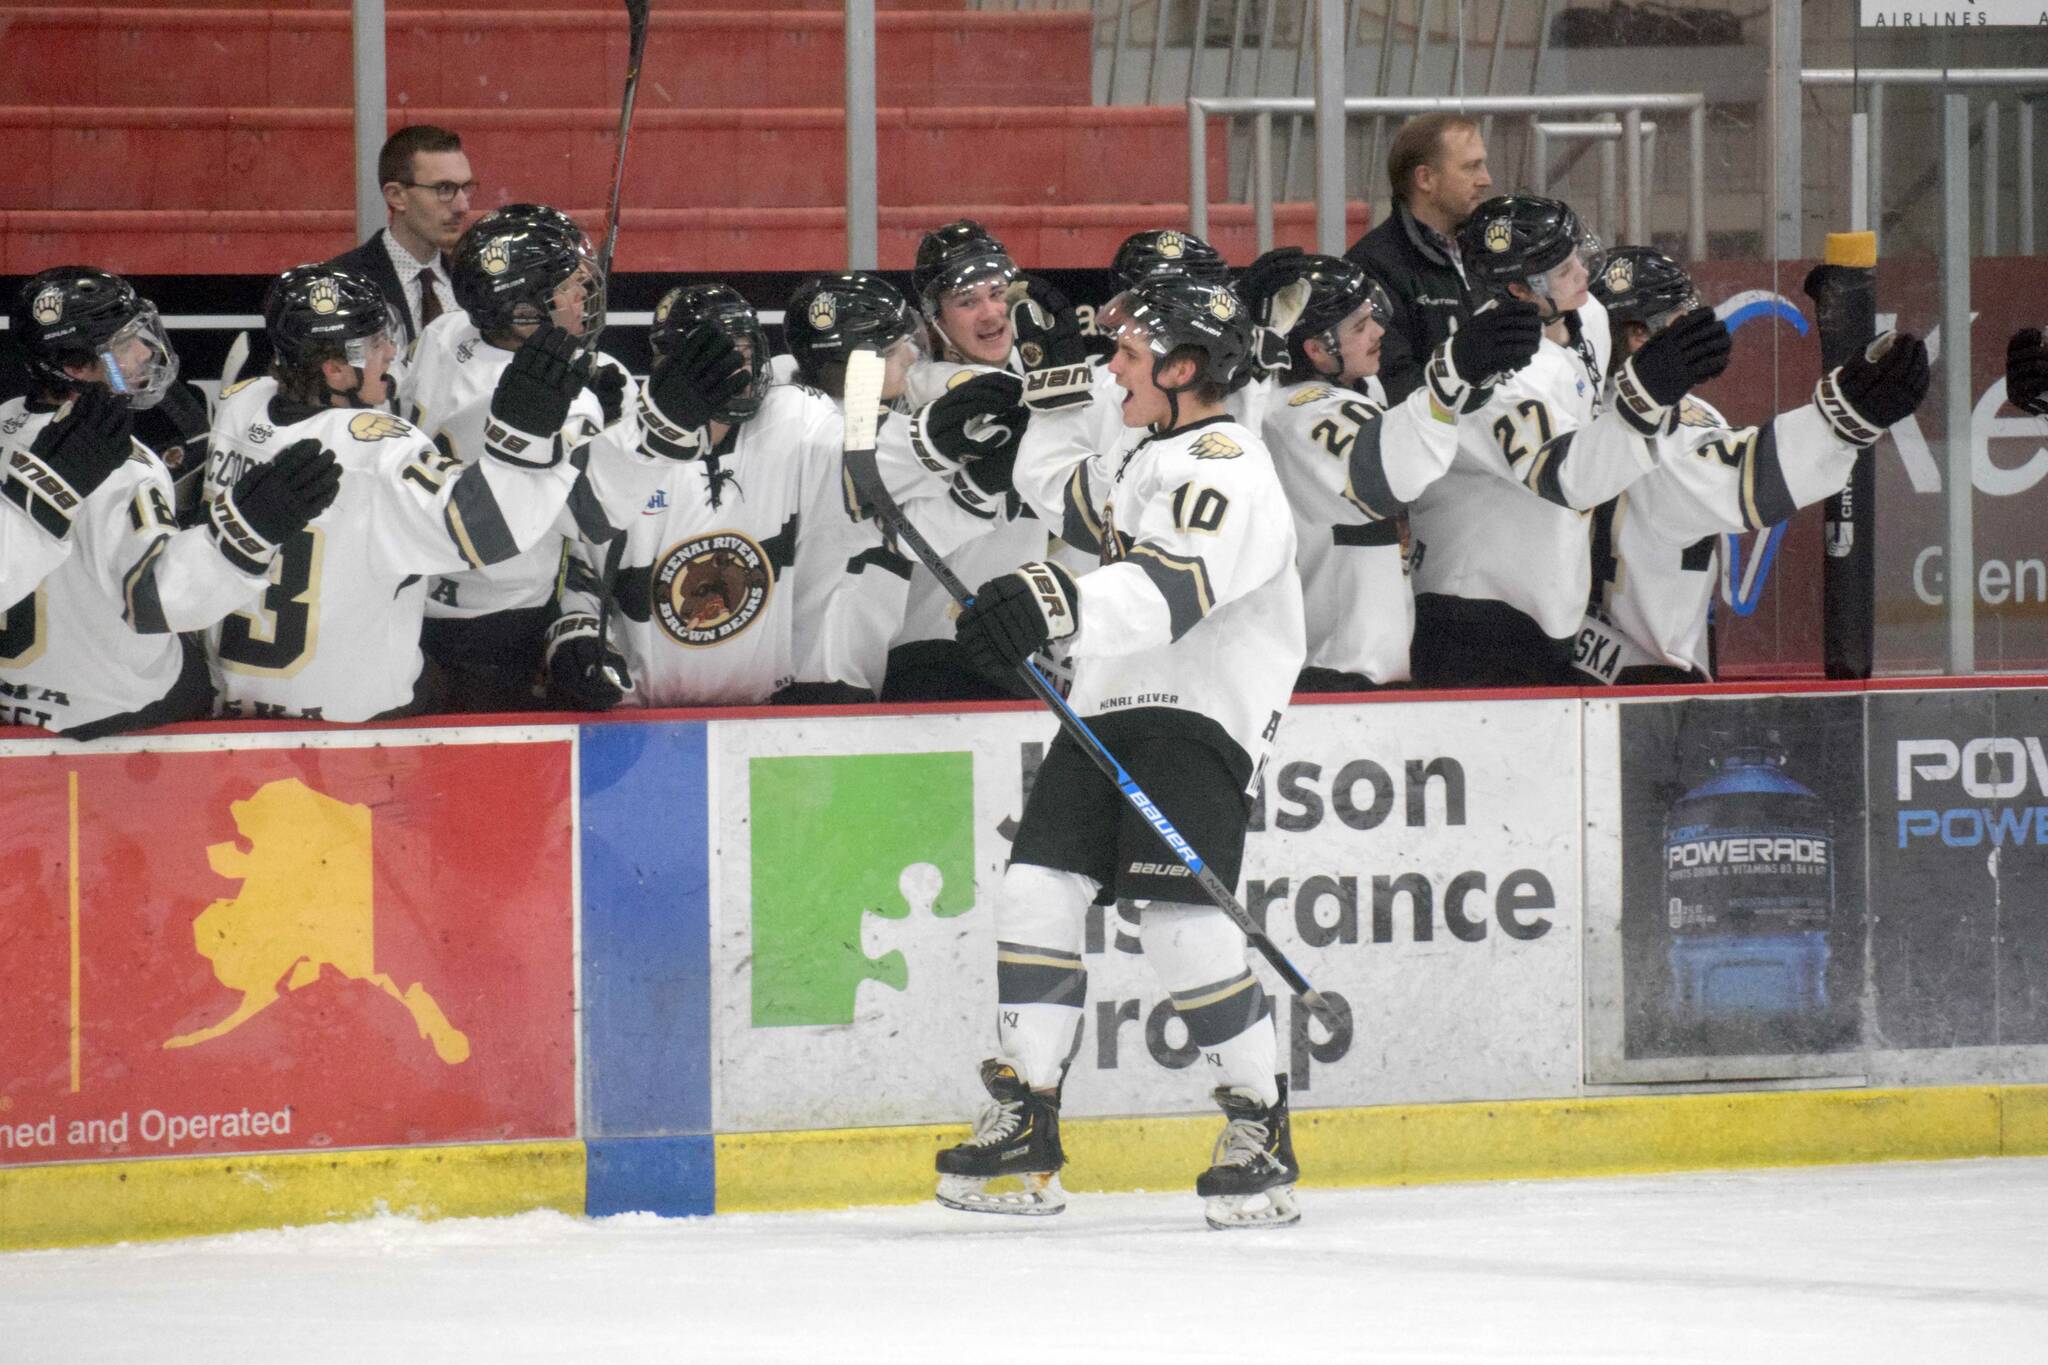 Caden Triggs of the Kenai River Brown Bears celebrates his first-period goal against the Springfield (Illinois) Jr. Blues on Thursday, Nov. 18, 2021, at the Soldotna Regional Sports Complex in Soldotna, Alaska. (Photo by Jeff Helminiak/Peninsula Clarion)